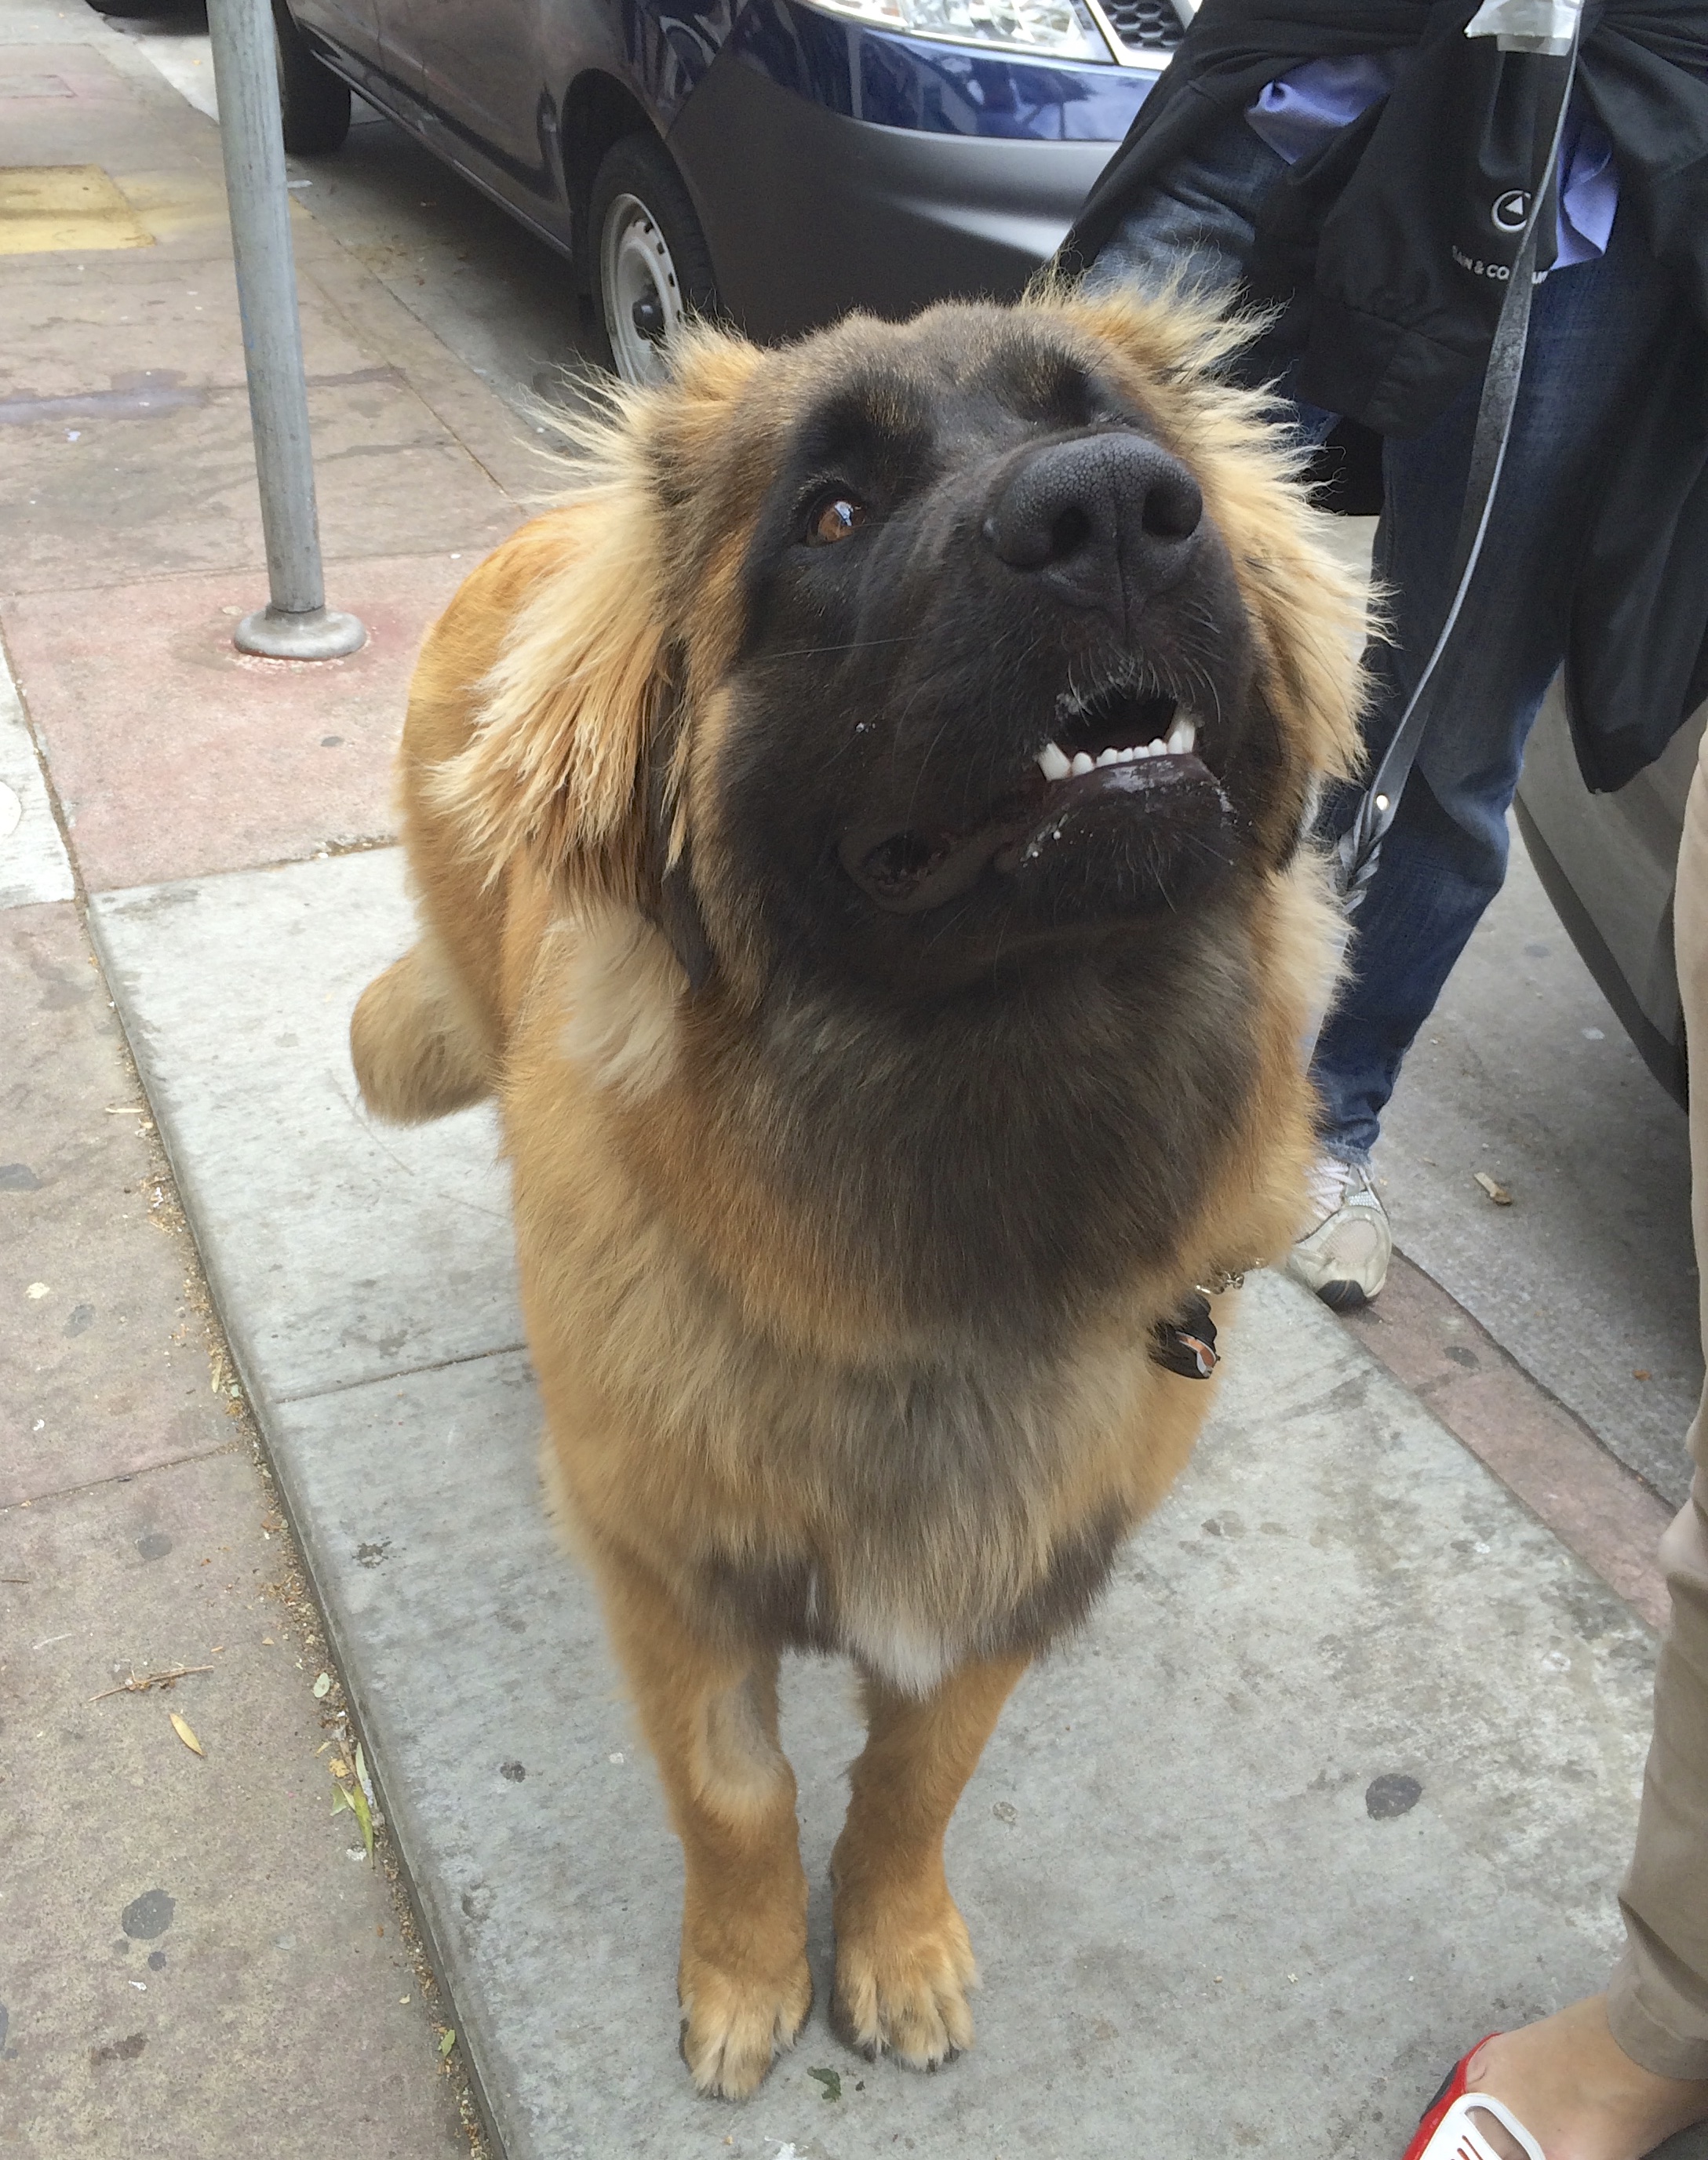 Leonberger Standing And Looking Intently At Something Out Of Camera View